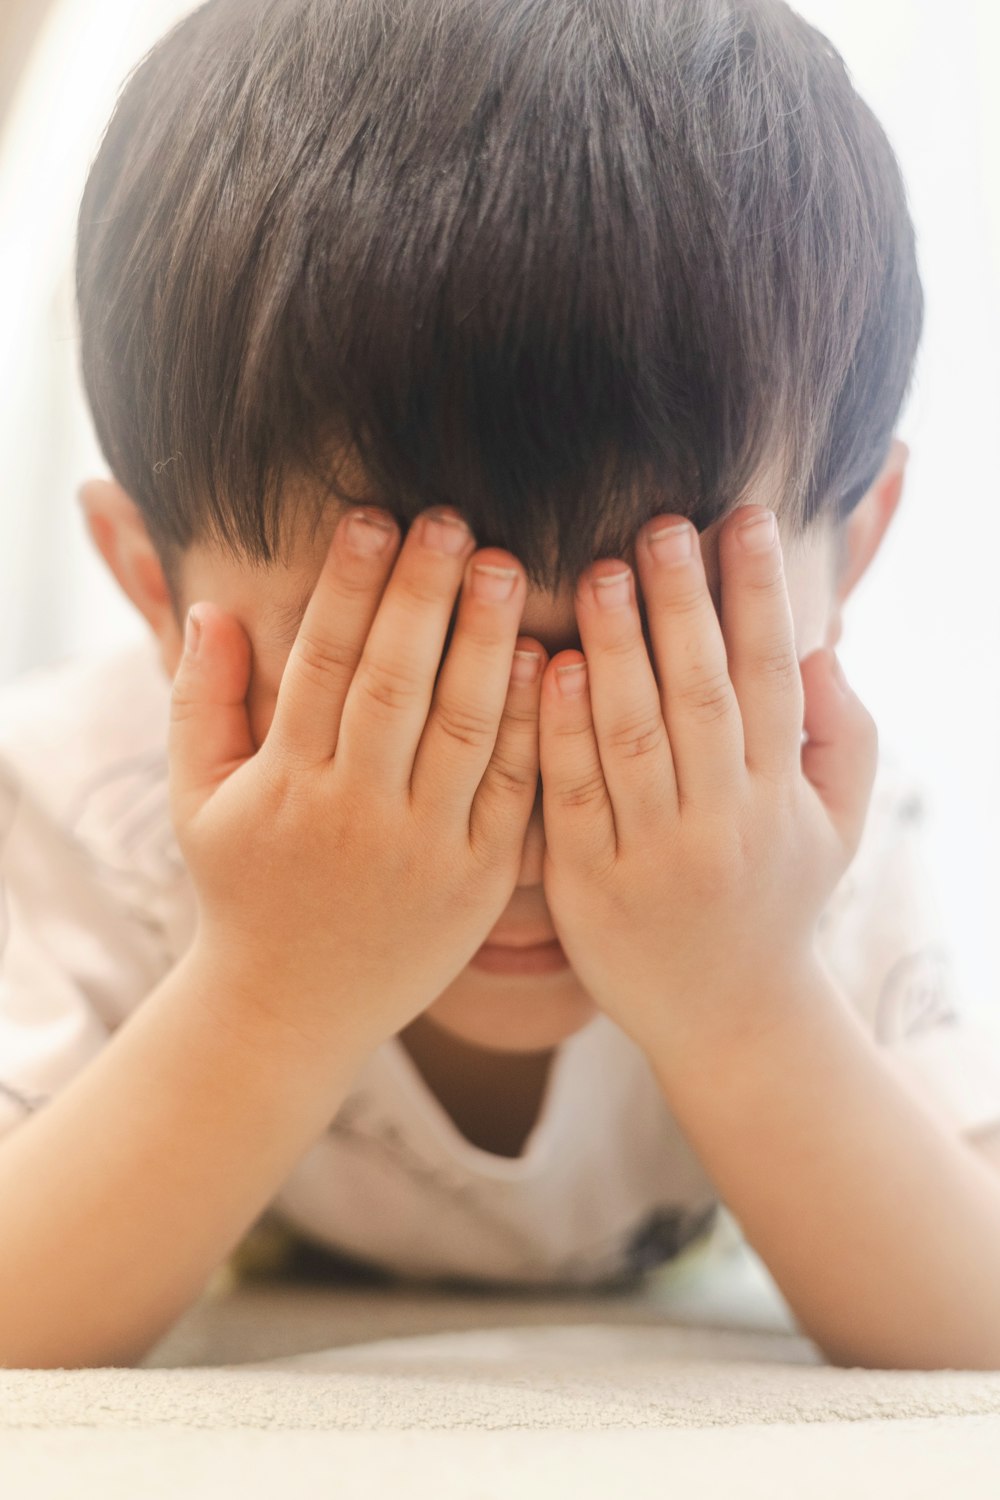 a young boy covering his eyes with his hands